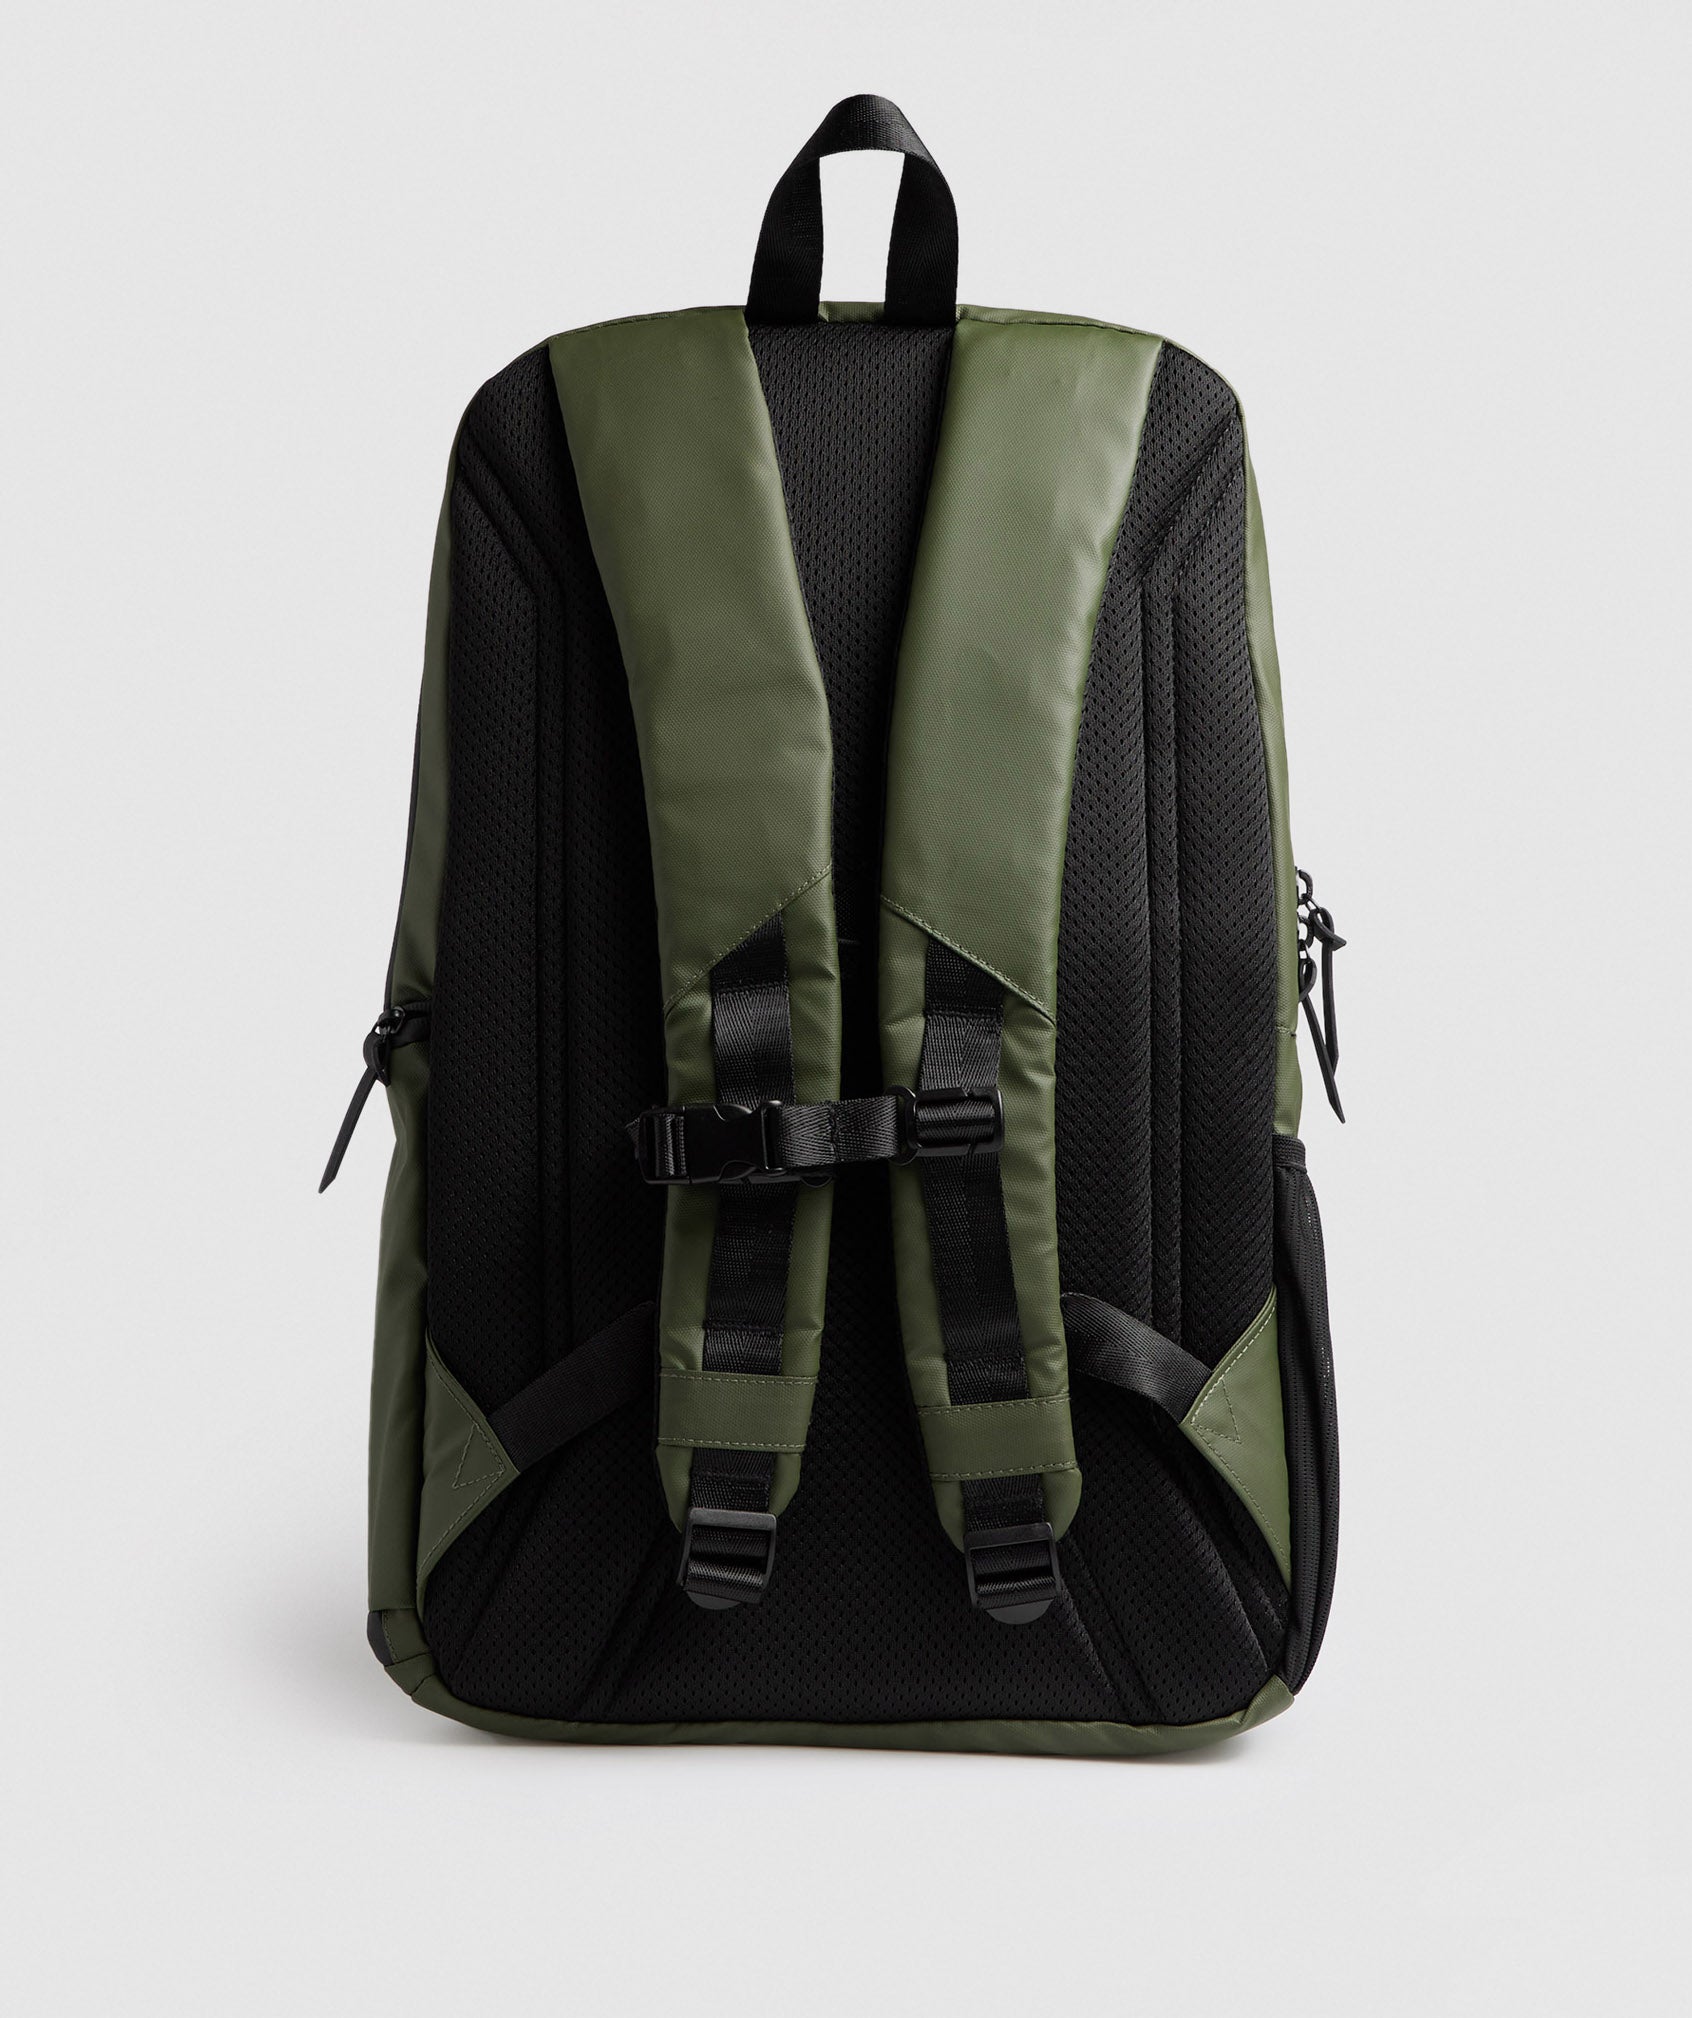 X-Series 0.1 Backpack in Core Olive/Black - view 2